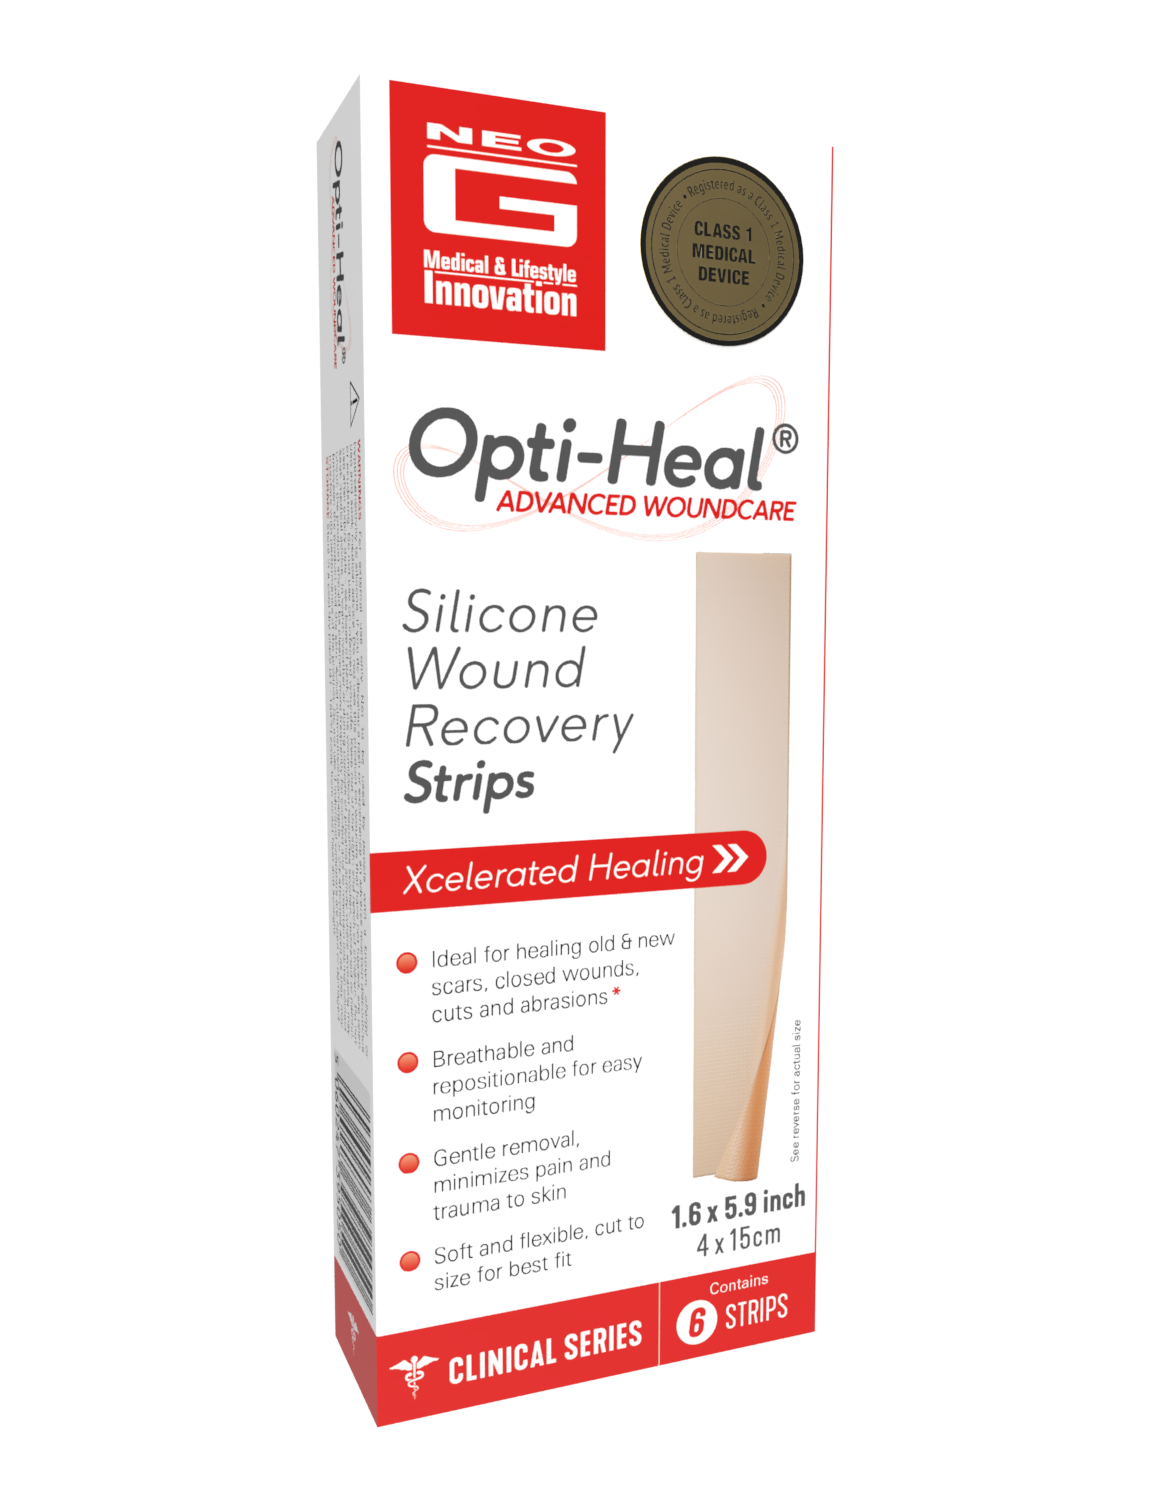 Silicone Wound Recovery Strips